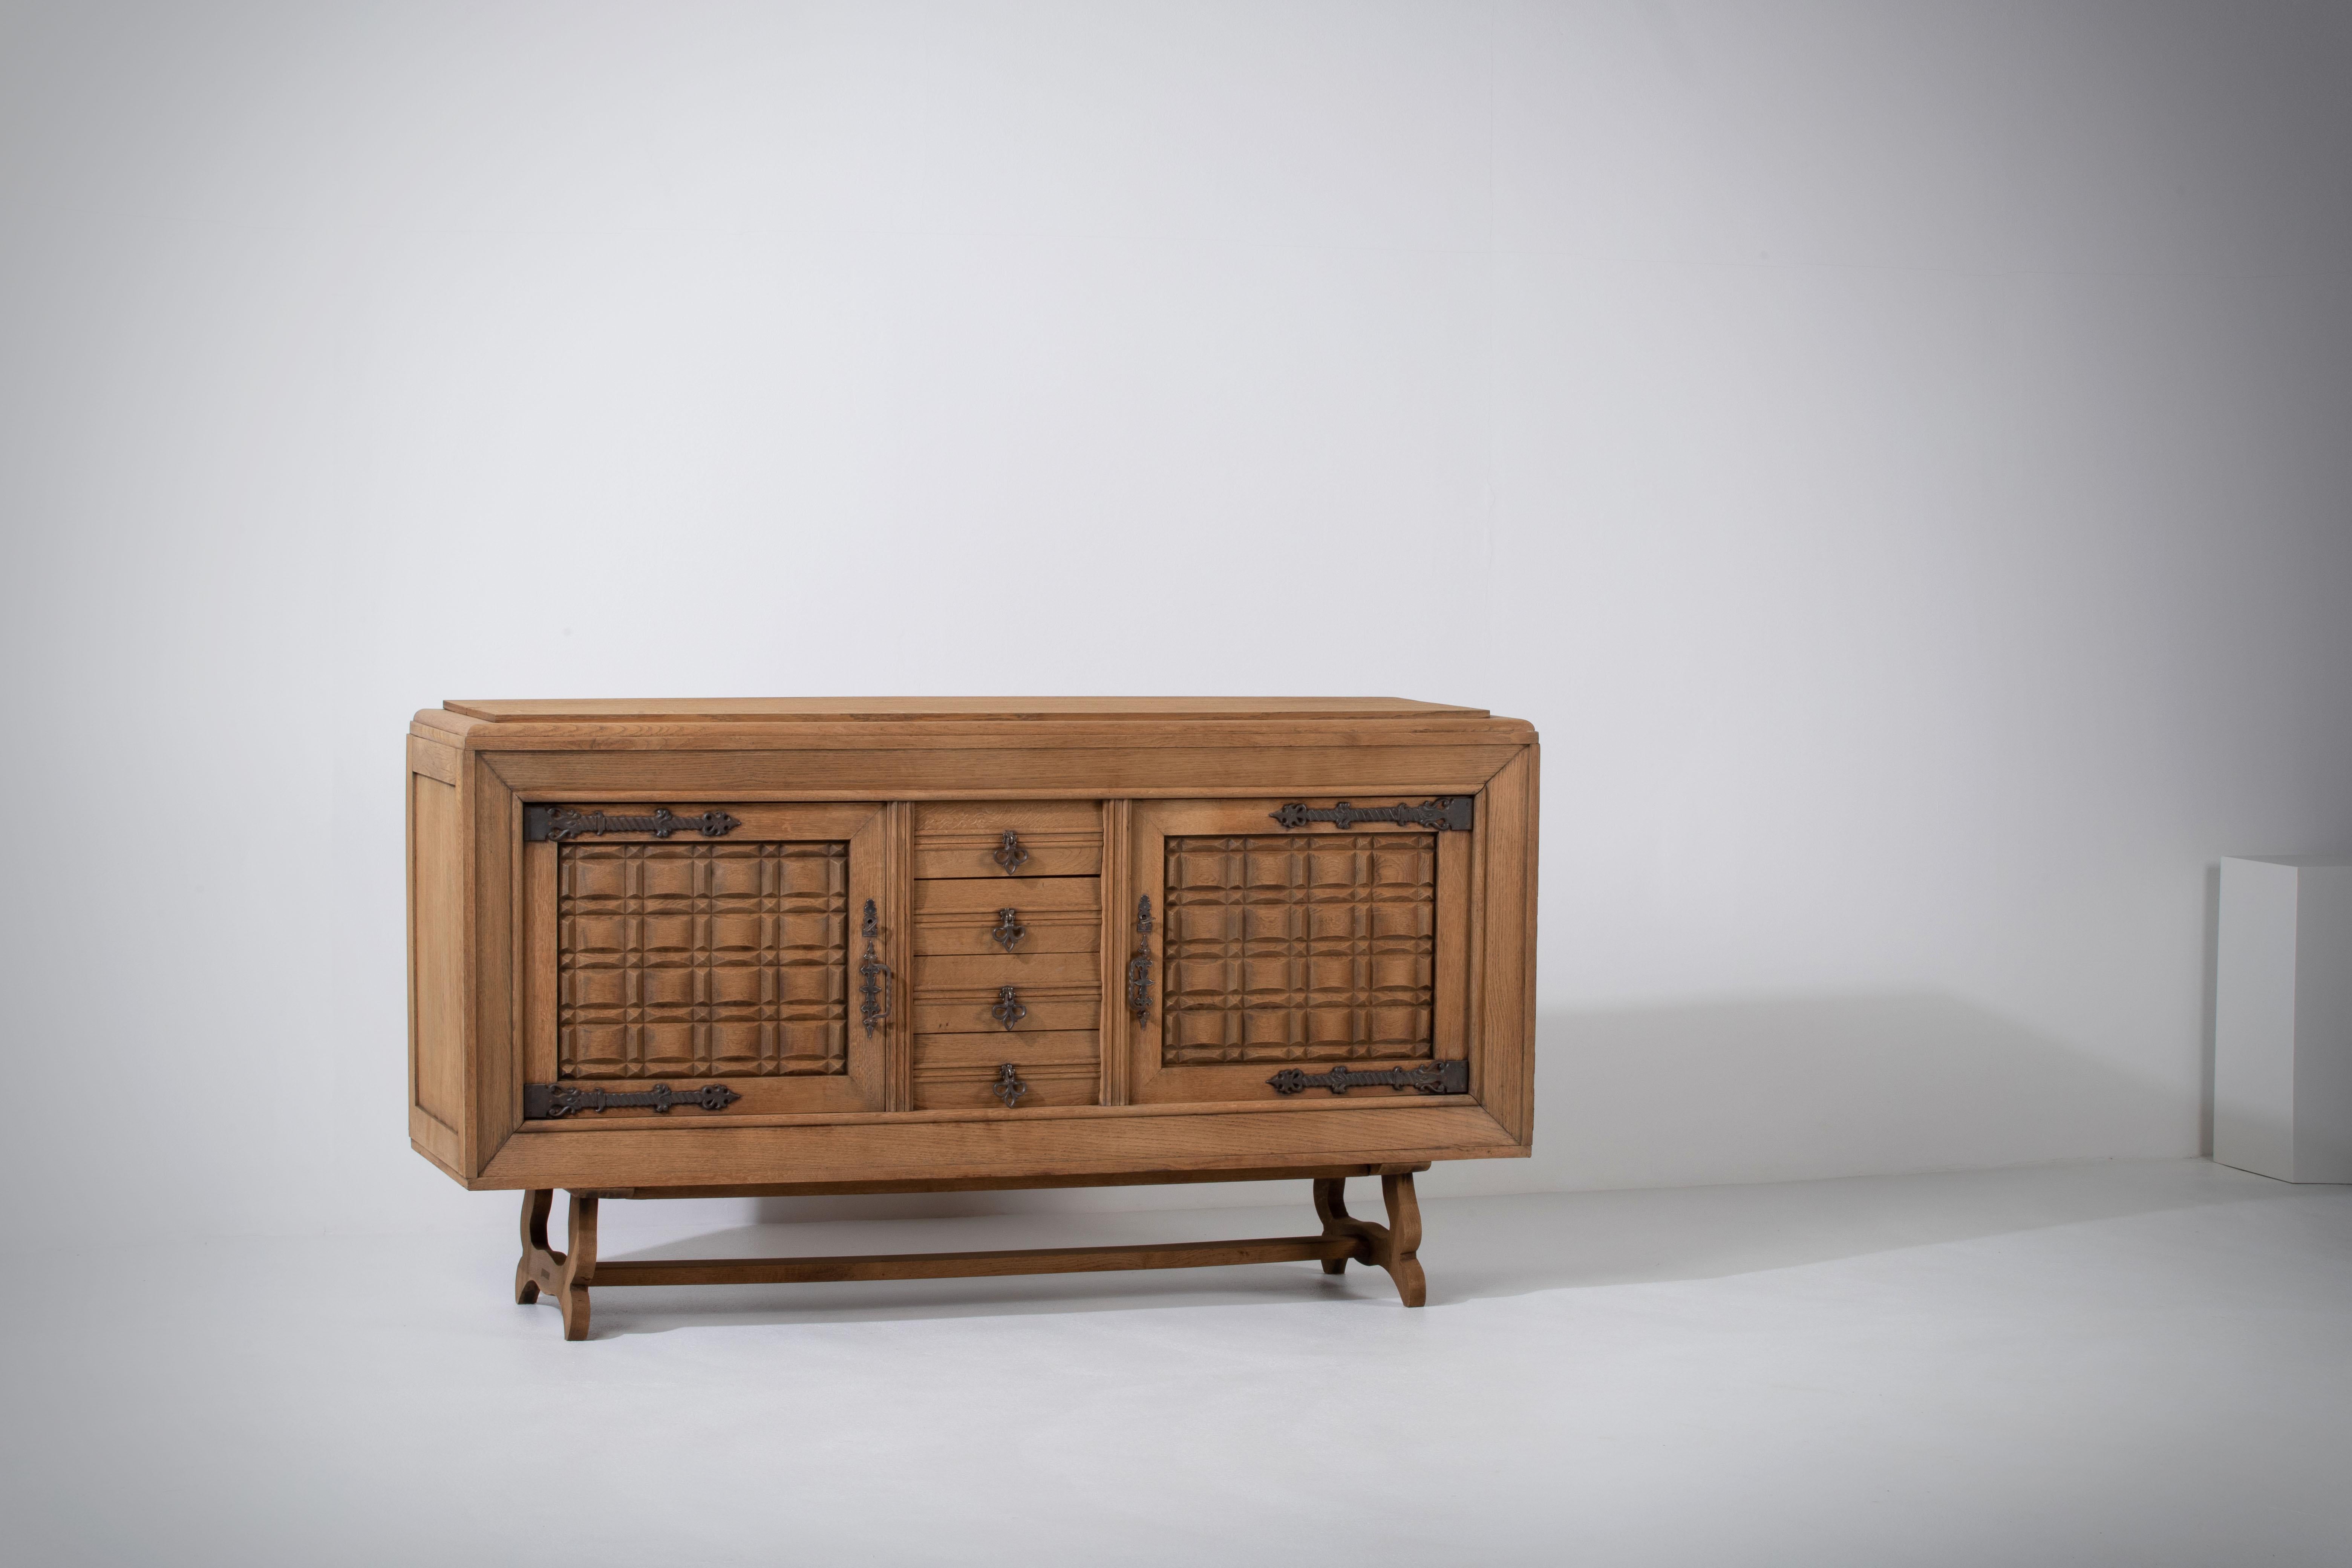 Presenting an exquisite Brutalist sideboard from the 1940s, crafted with natural oak in France. This elegant piece showcases the unique blend of ruggedness and refinement that defines the Brutalist style. The sideboard features intricately carved